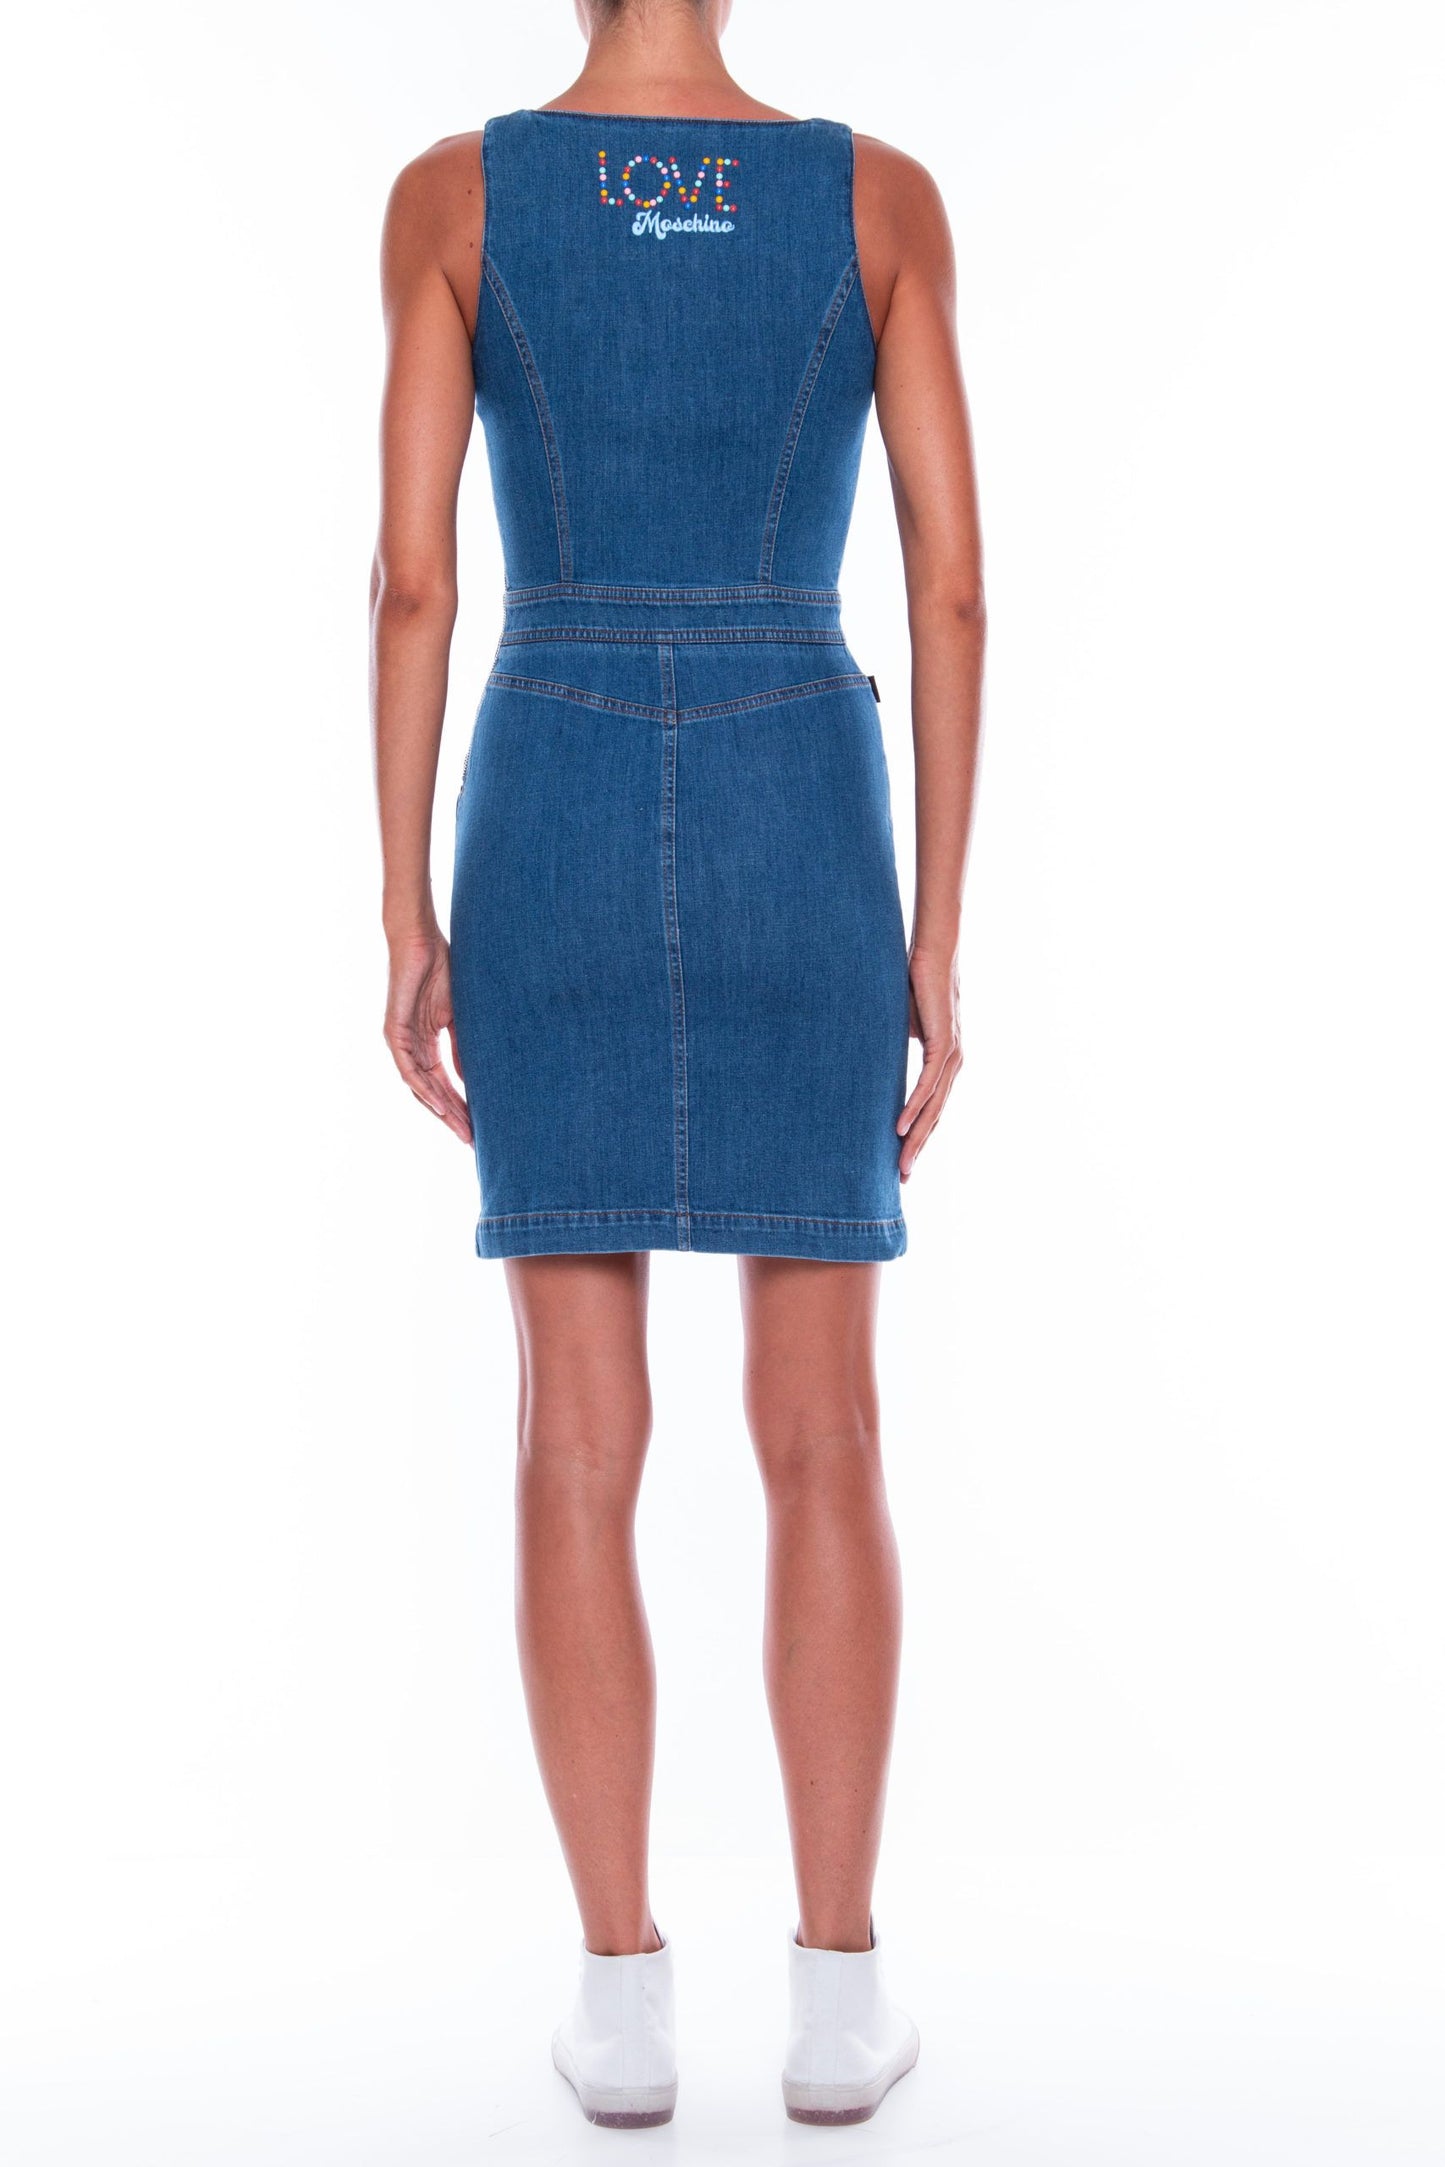 Love Moschino Chic Sleeveless Denim Dress with Colorful Accents